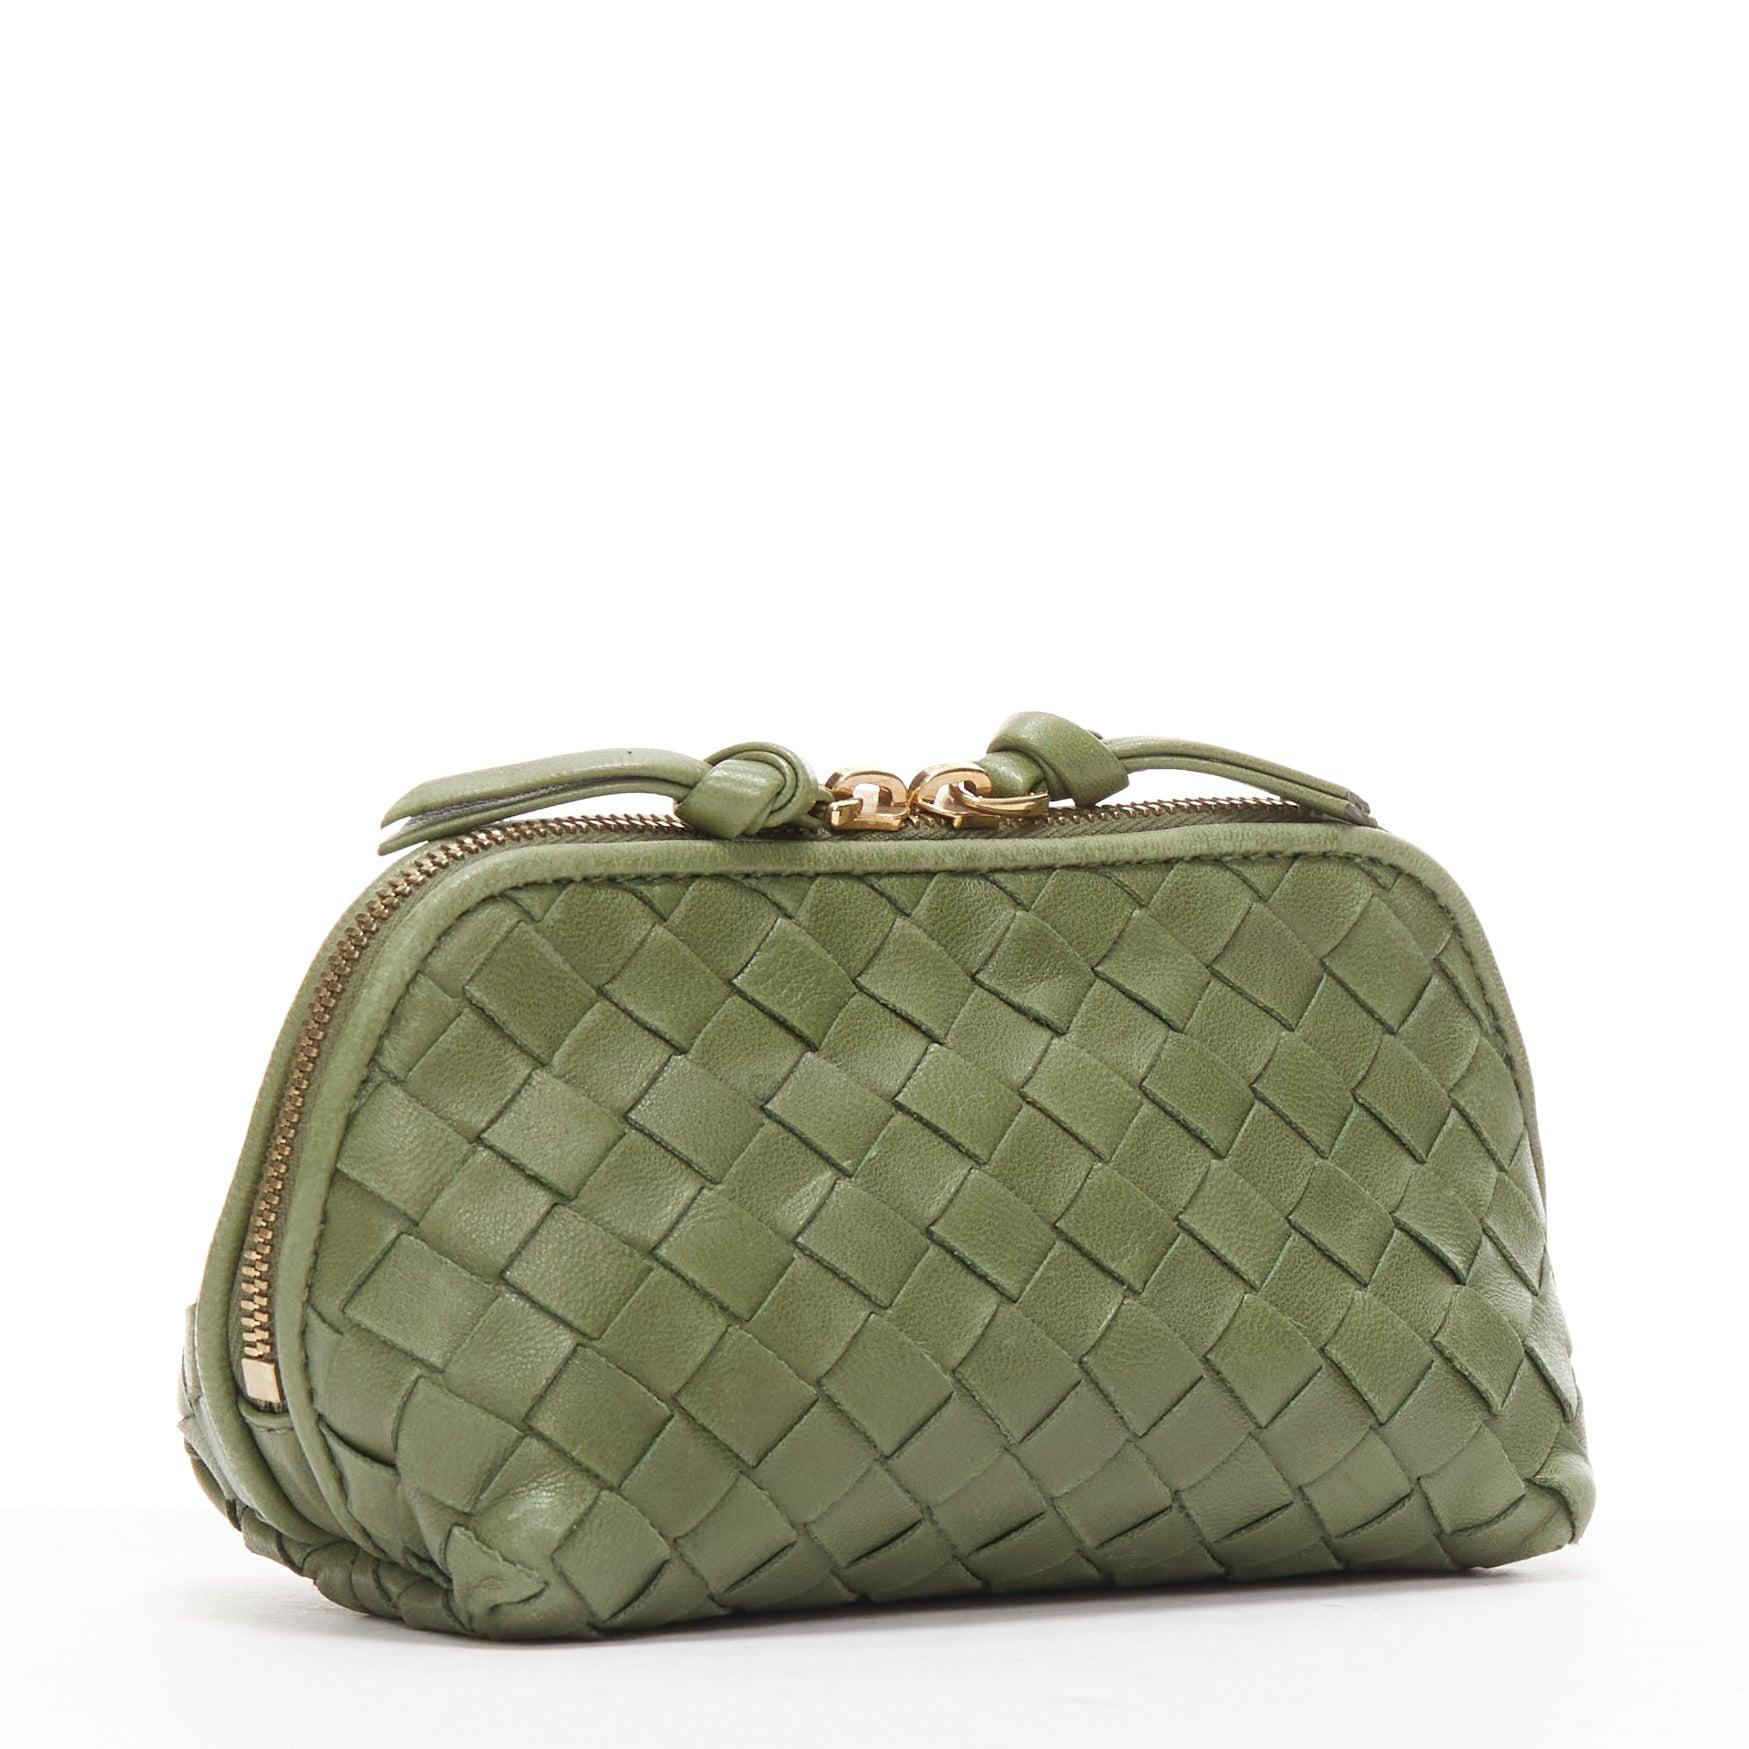 BOTTEGA VENETA green intrecciato knot gold zip small zip pouch bag
Reference: AAWC/A00982
Brand: Bottega Veneta
Material: Leather
Color: Green
Pattern: Solid
Closure: Zip
Lining: Brown Fabric
Extra Details: Gold two end zips.
Made in: